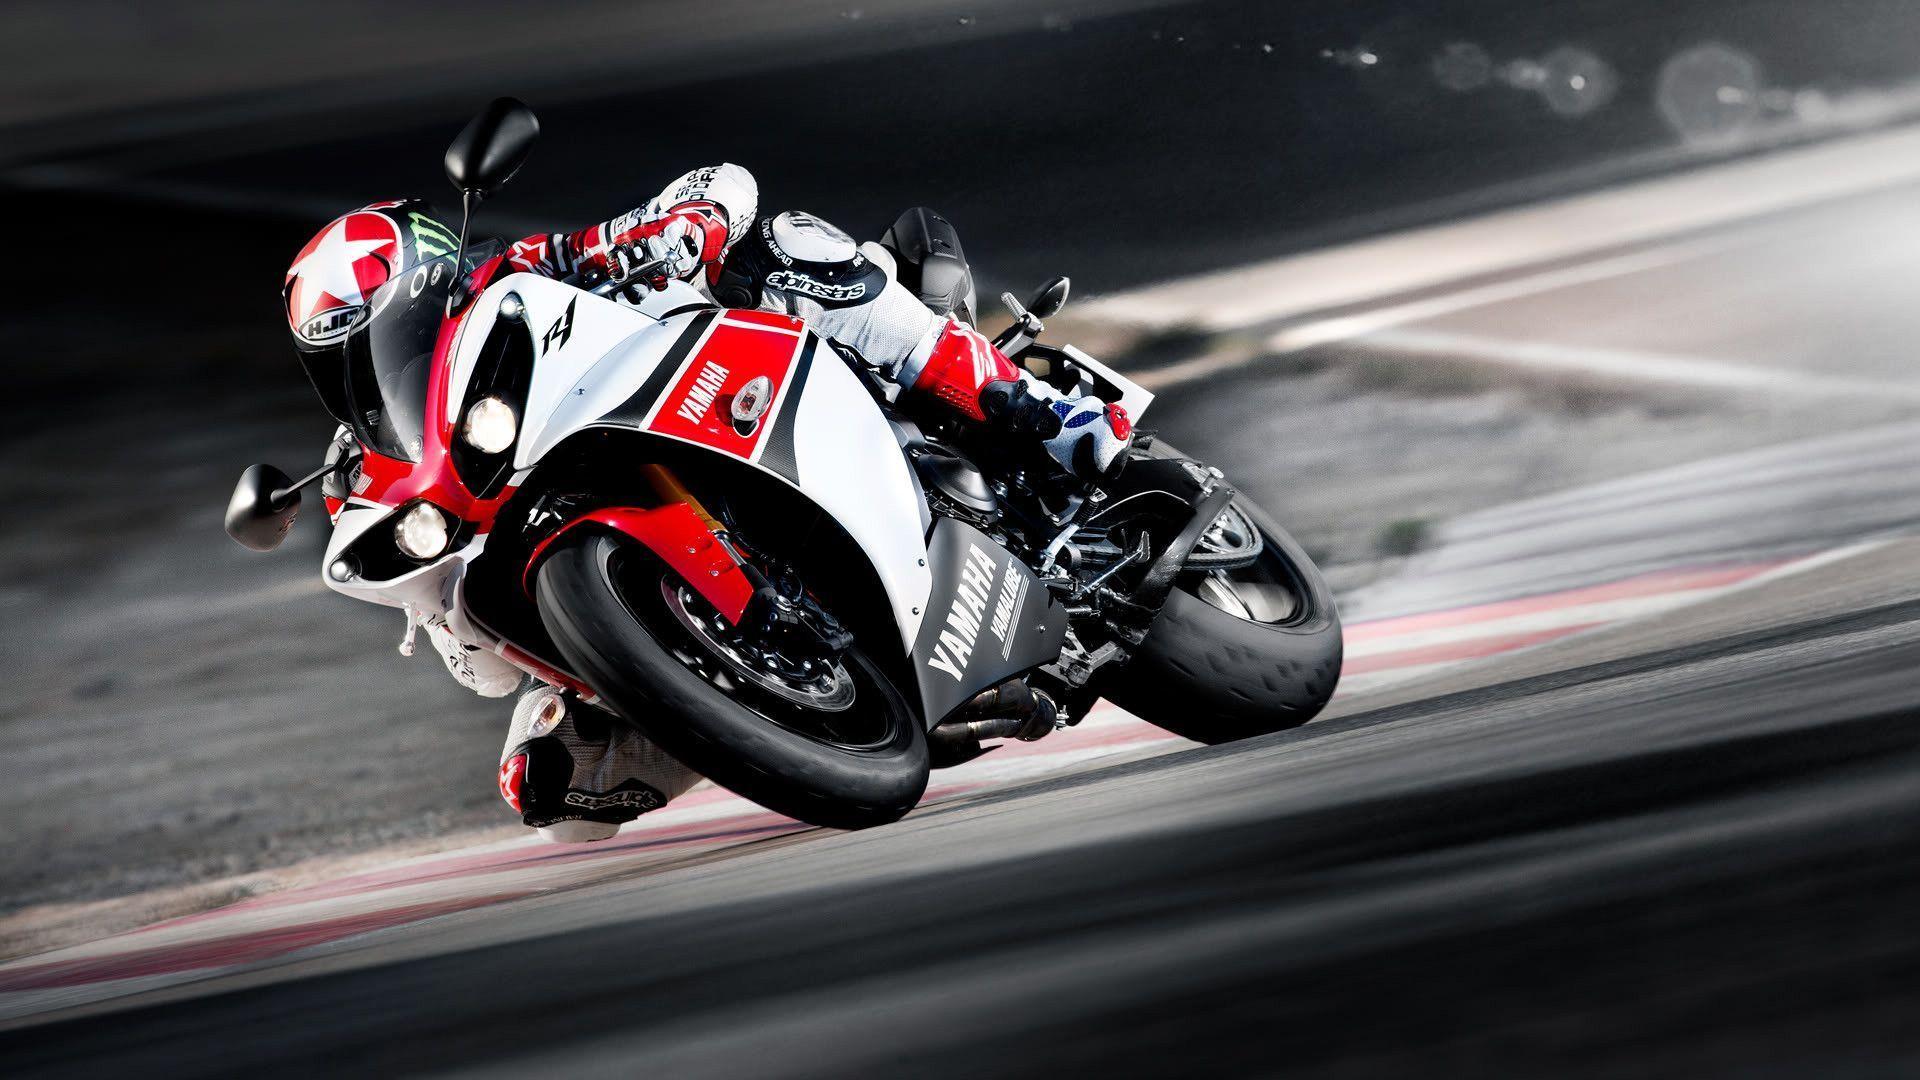 Yamaha R1 Red Wallpapers